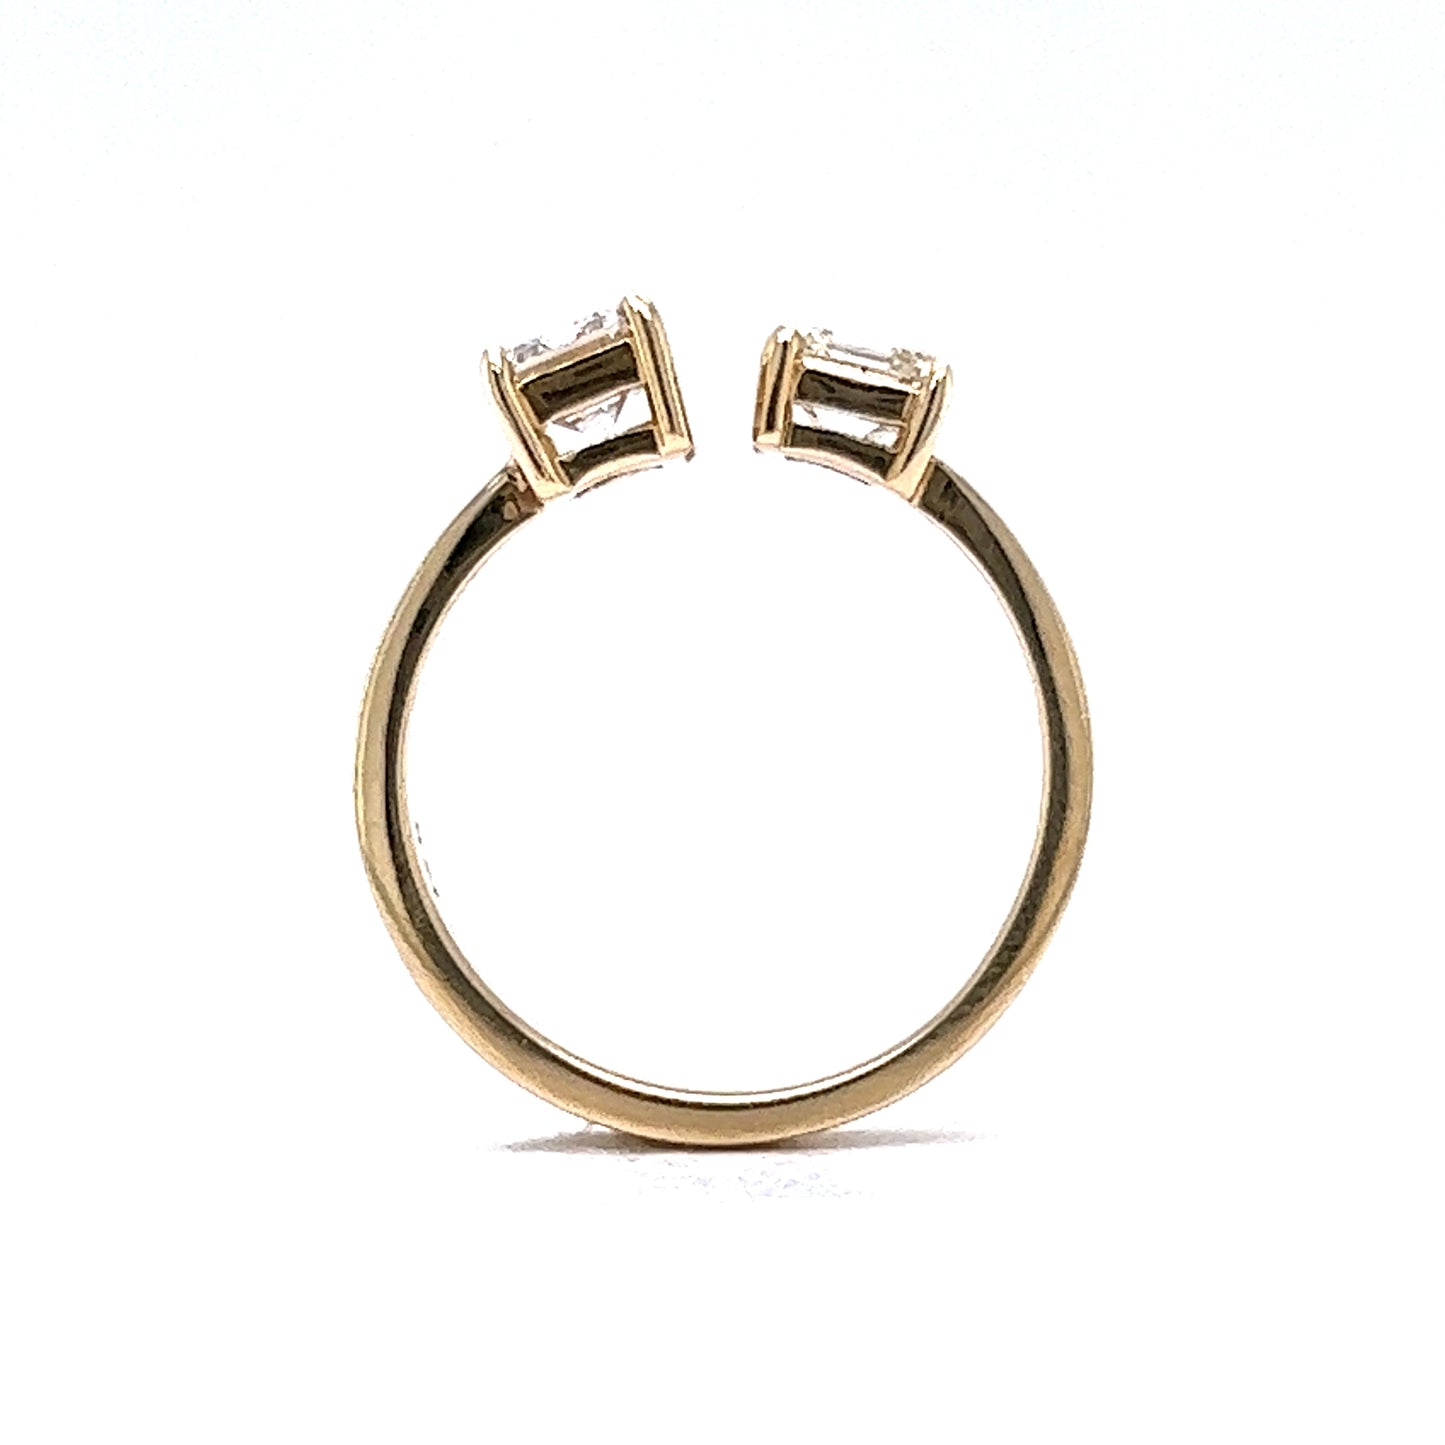 1.27 Diamond Open Stacking Ring in 14k Yellow Gold